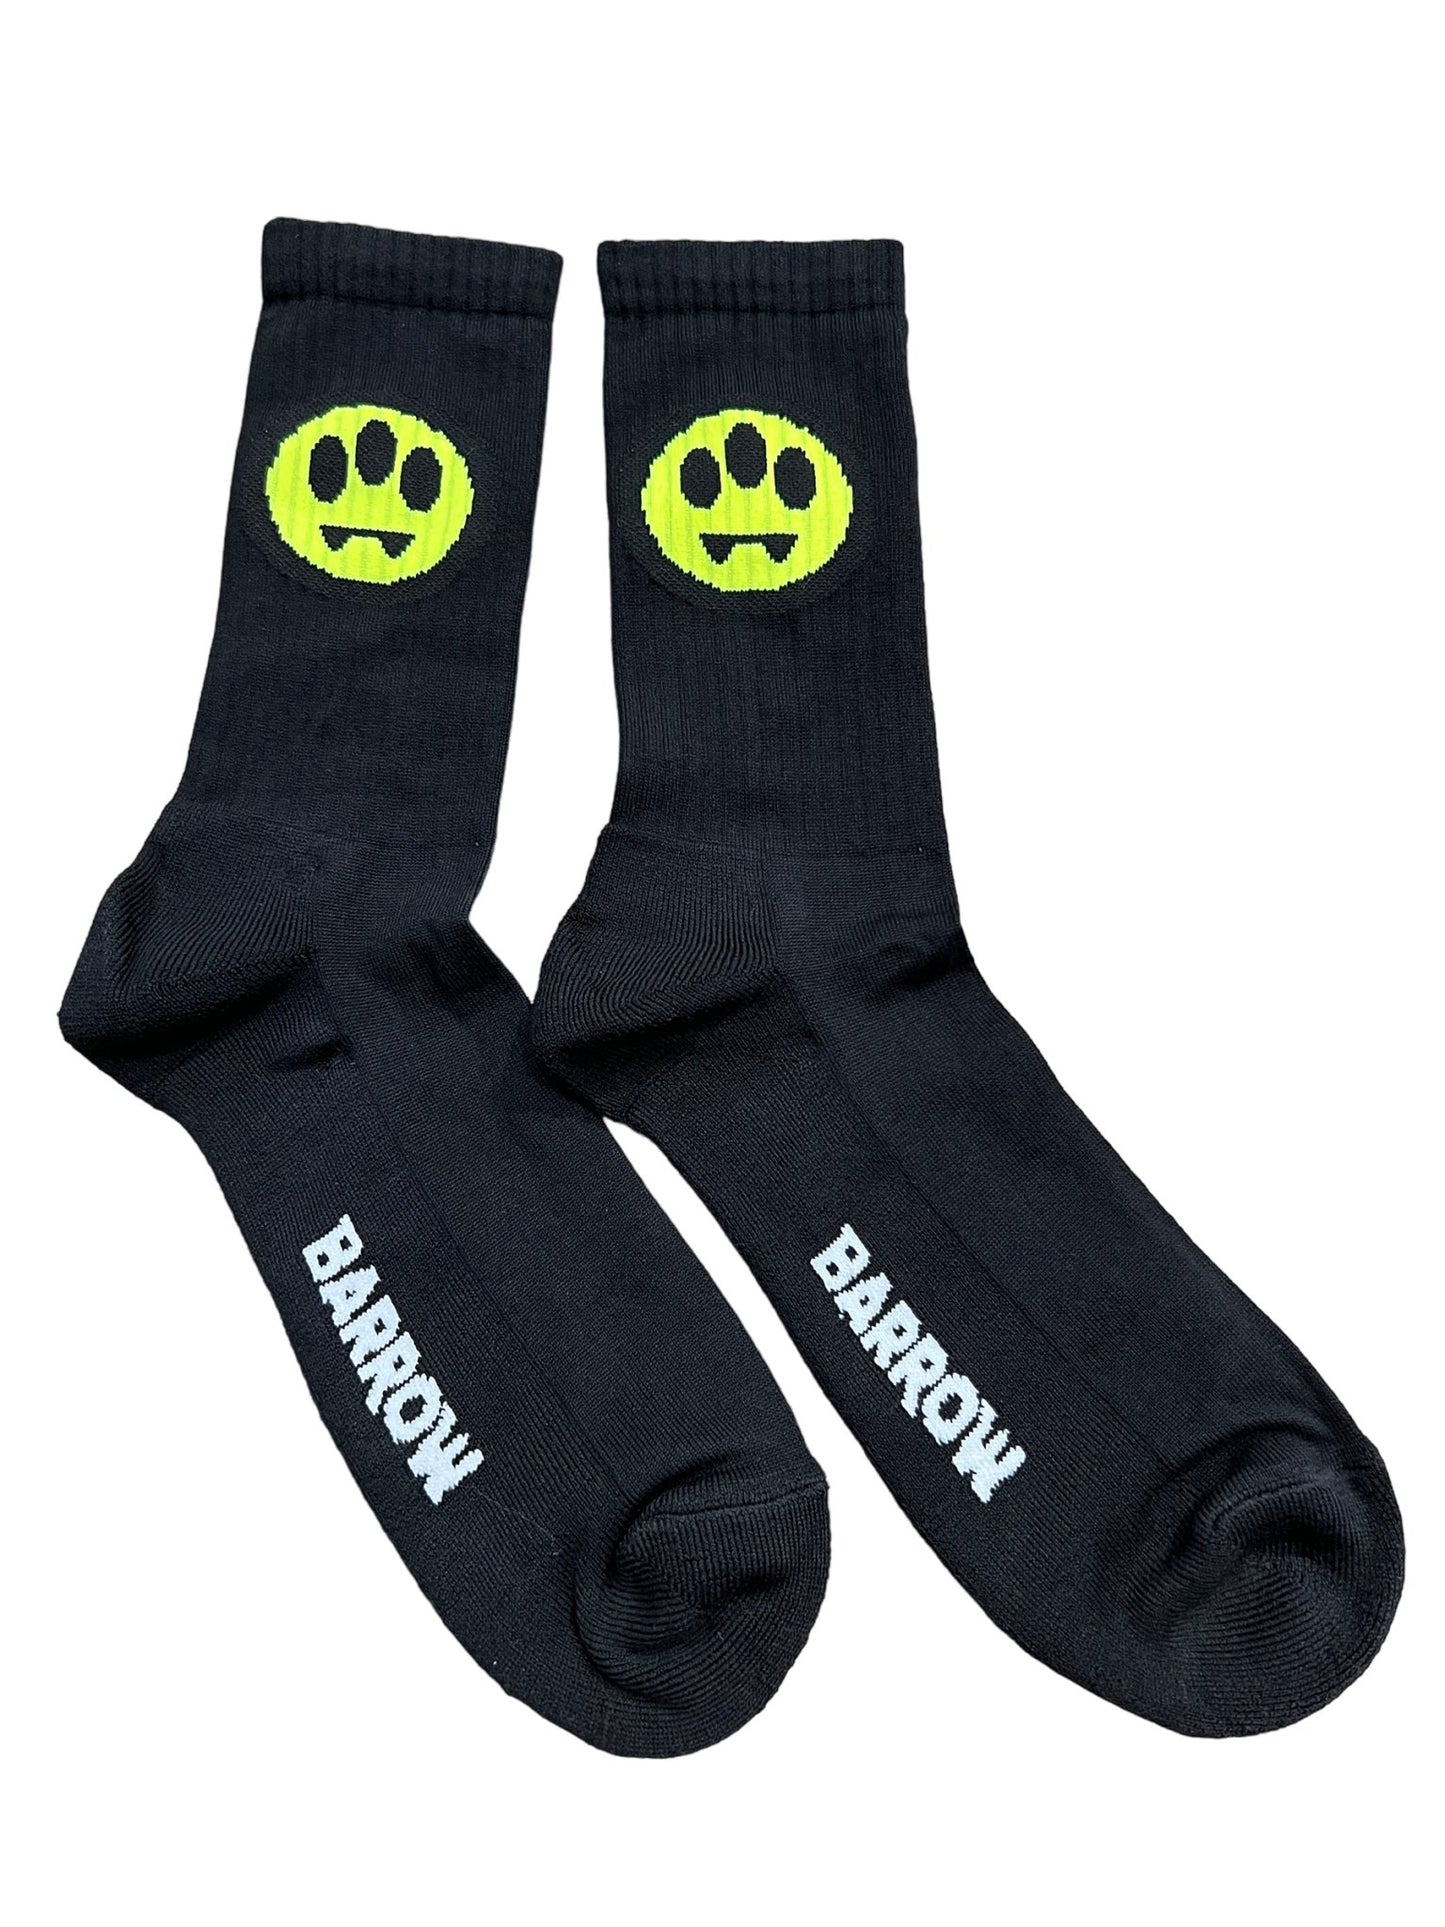 A pair of black BARROW S4BWUASO140 graphic socks with neon green smiley face logos on the ankles, Made In Italy.